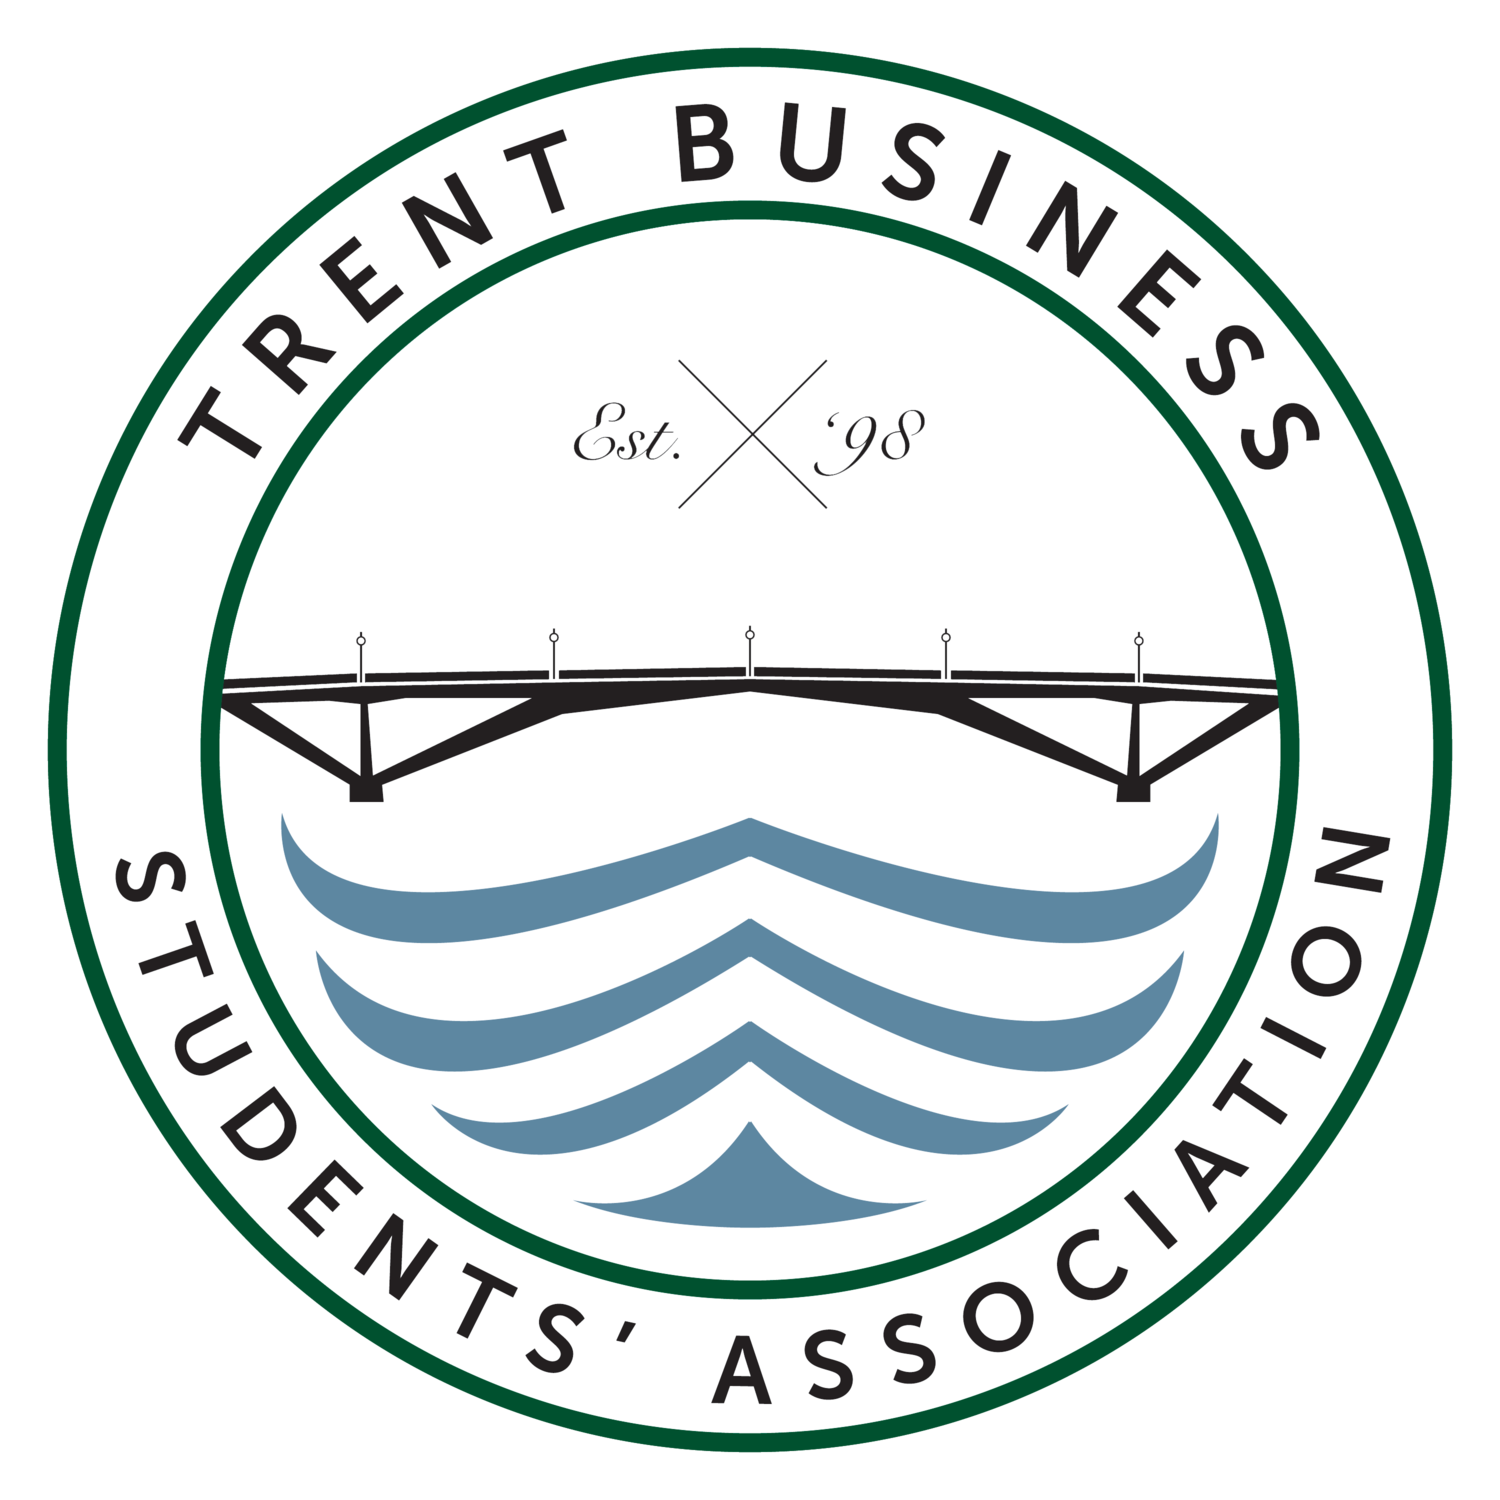 Trent Business Students Association Badge with Trent Logo, River and Bridge